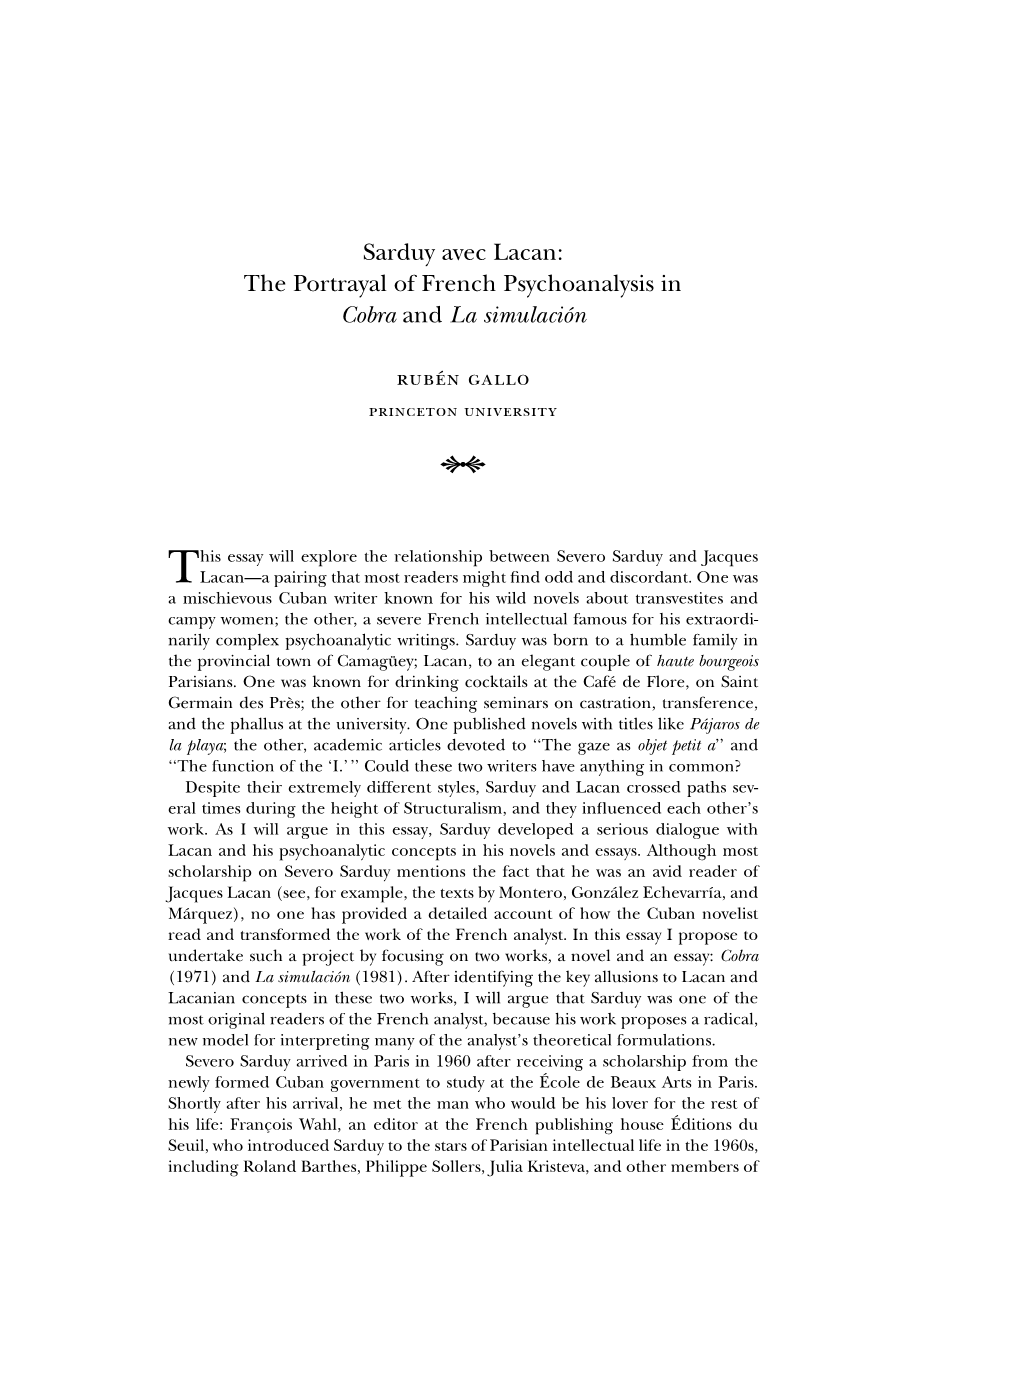 Sarduy Avec Lacan: the Portrayal of French Psychoanalysis in Cobra and La Simulacio´N